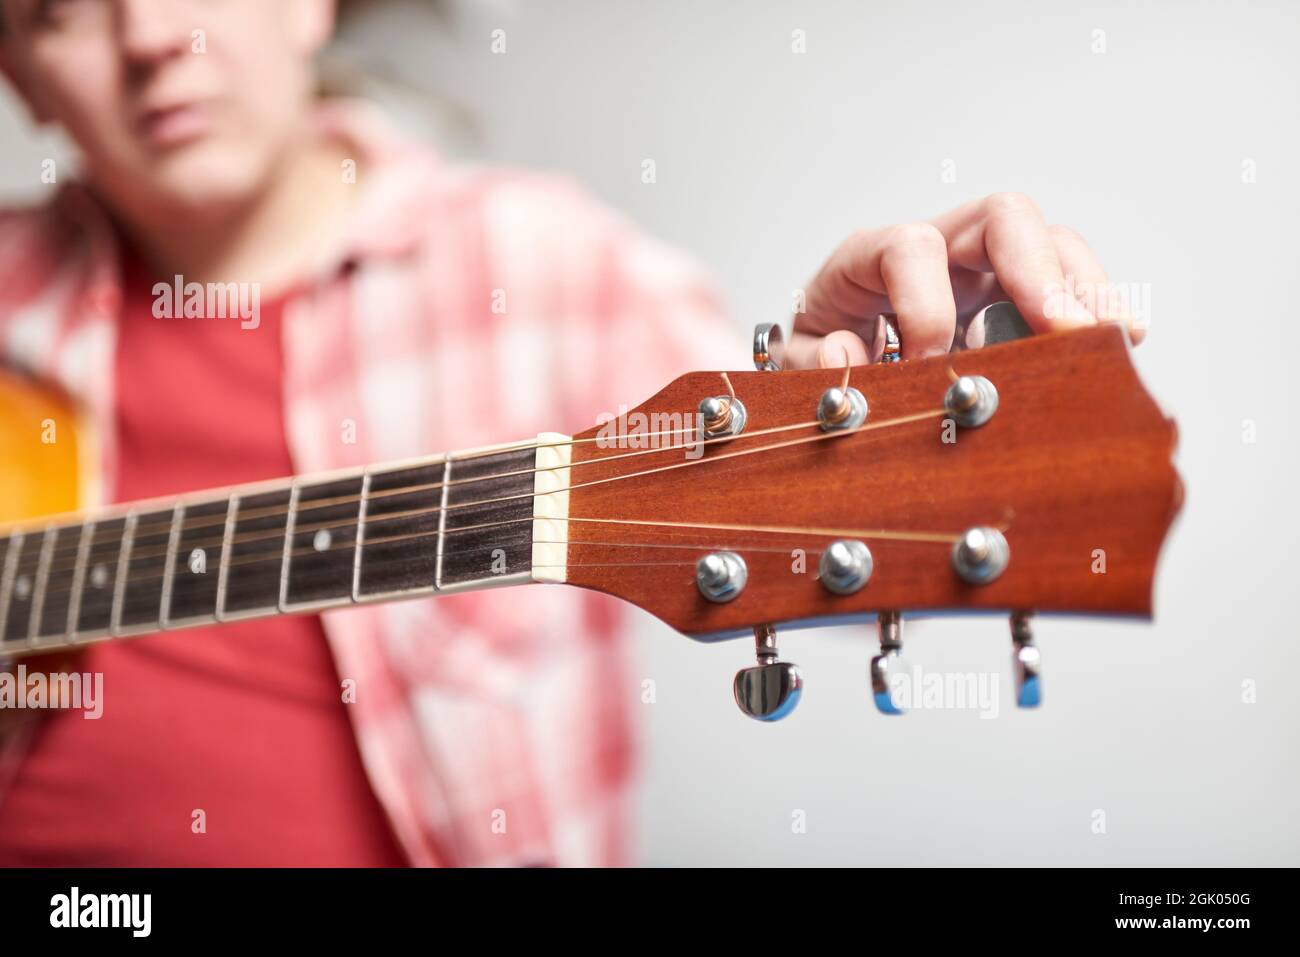 Young unknown man tuning a guitar, detail shot, focus in the hand and the headstock. Stock Photo